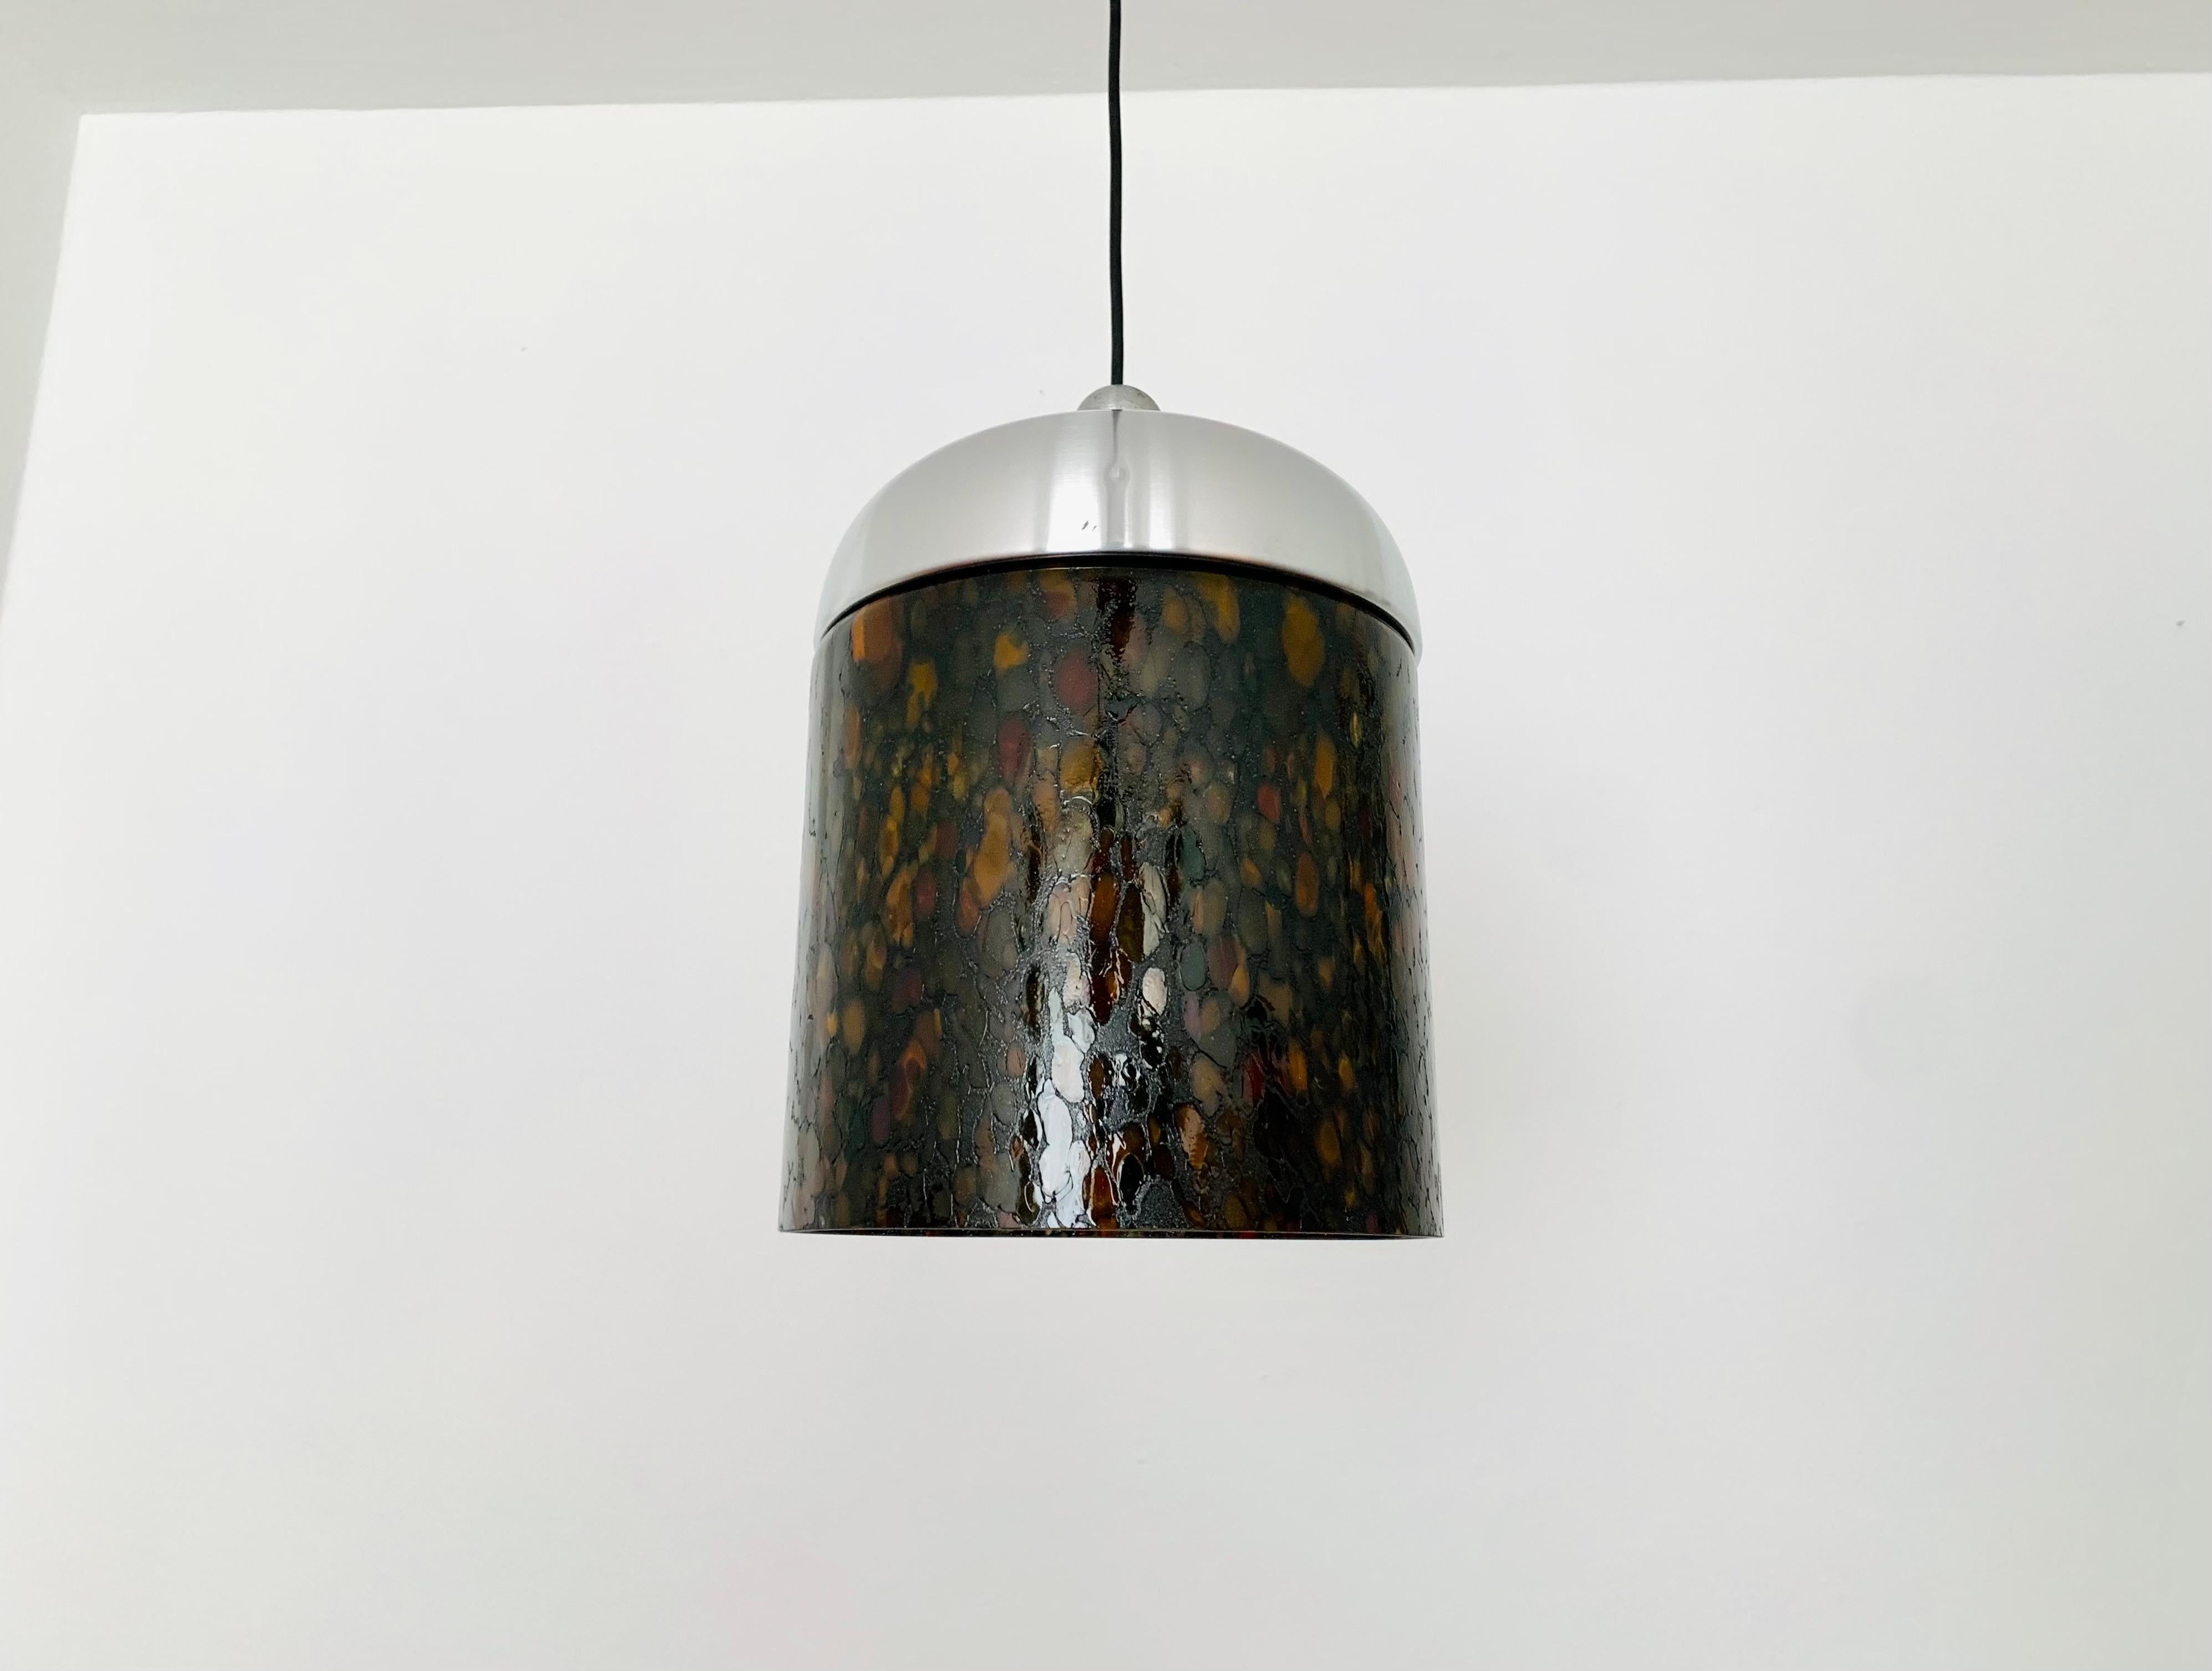 Exceptionally beautiful glass pendant lamp from the 1980s.
Very fine and beautiful design which fits wonderfully into any room.
The high-quality glass creates a beautiful and very comfortable light and a spectacular play of colors on the